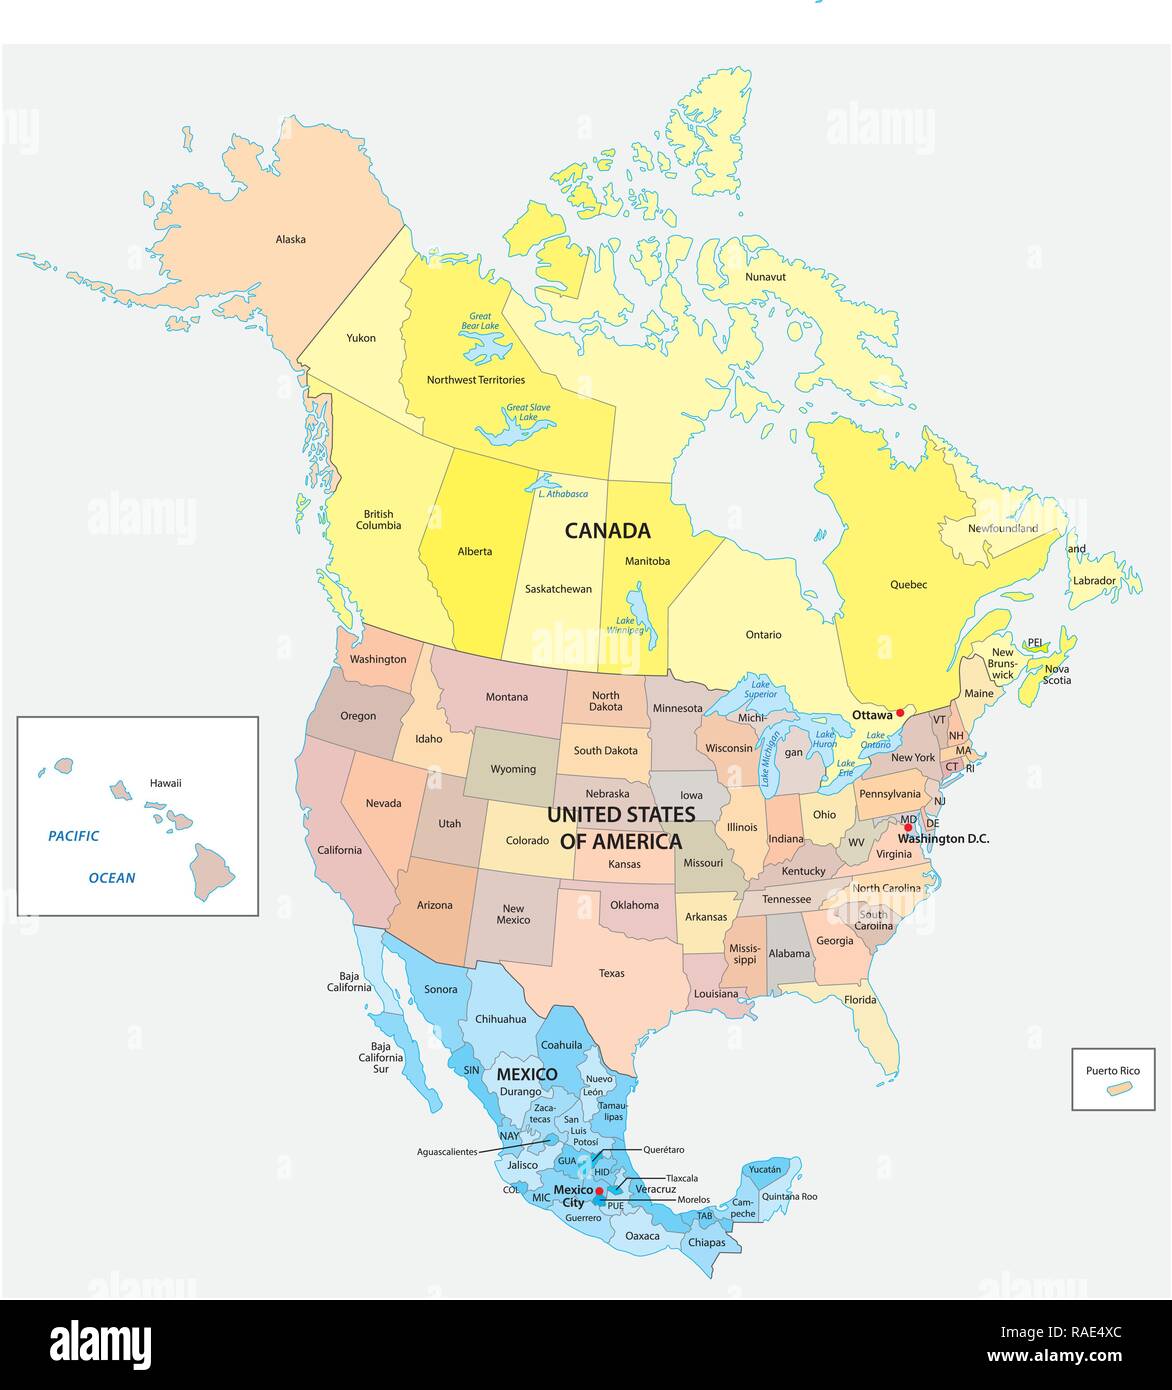 United States Of America And Canada Map Stock Photos United